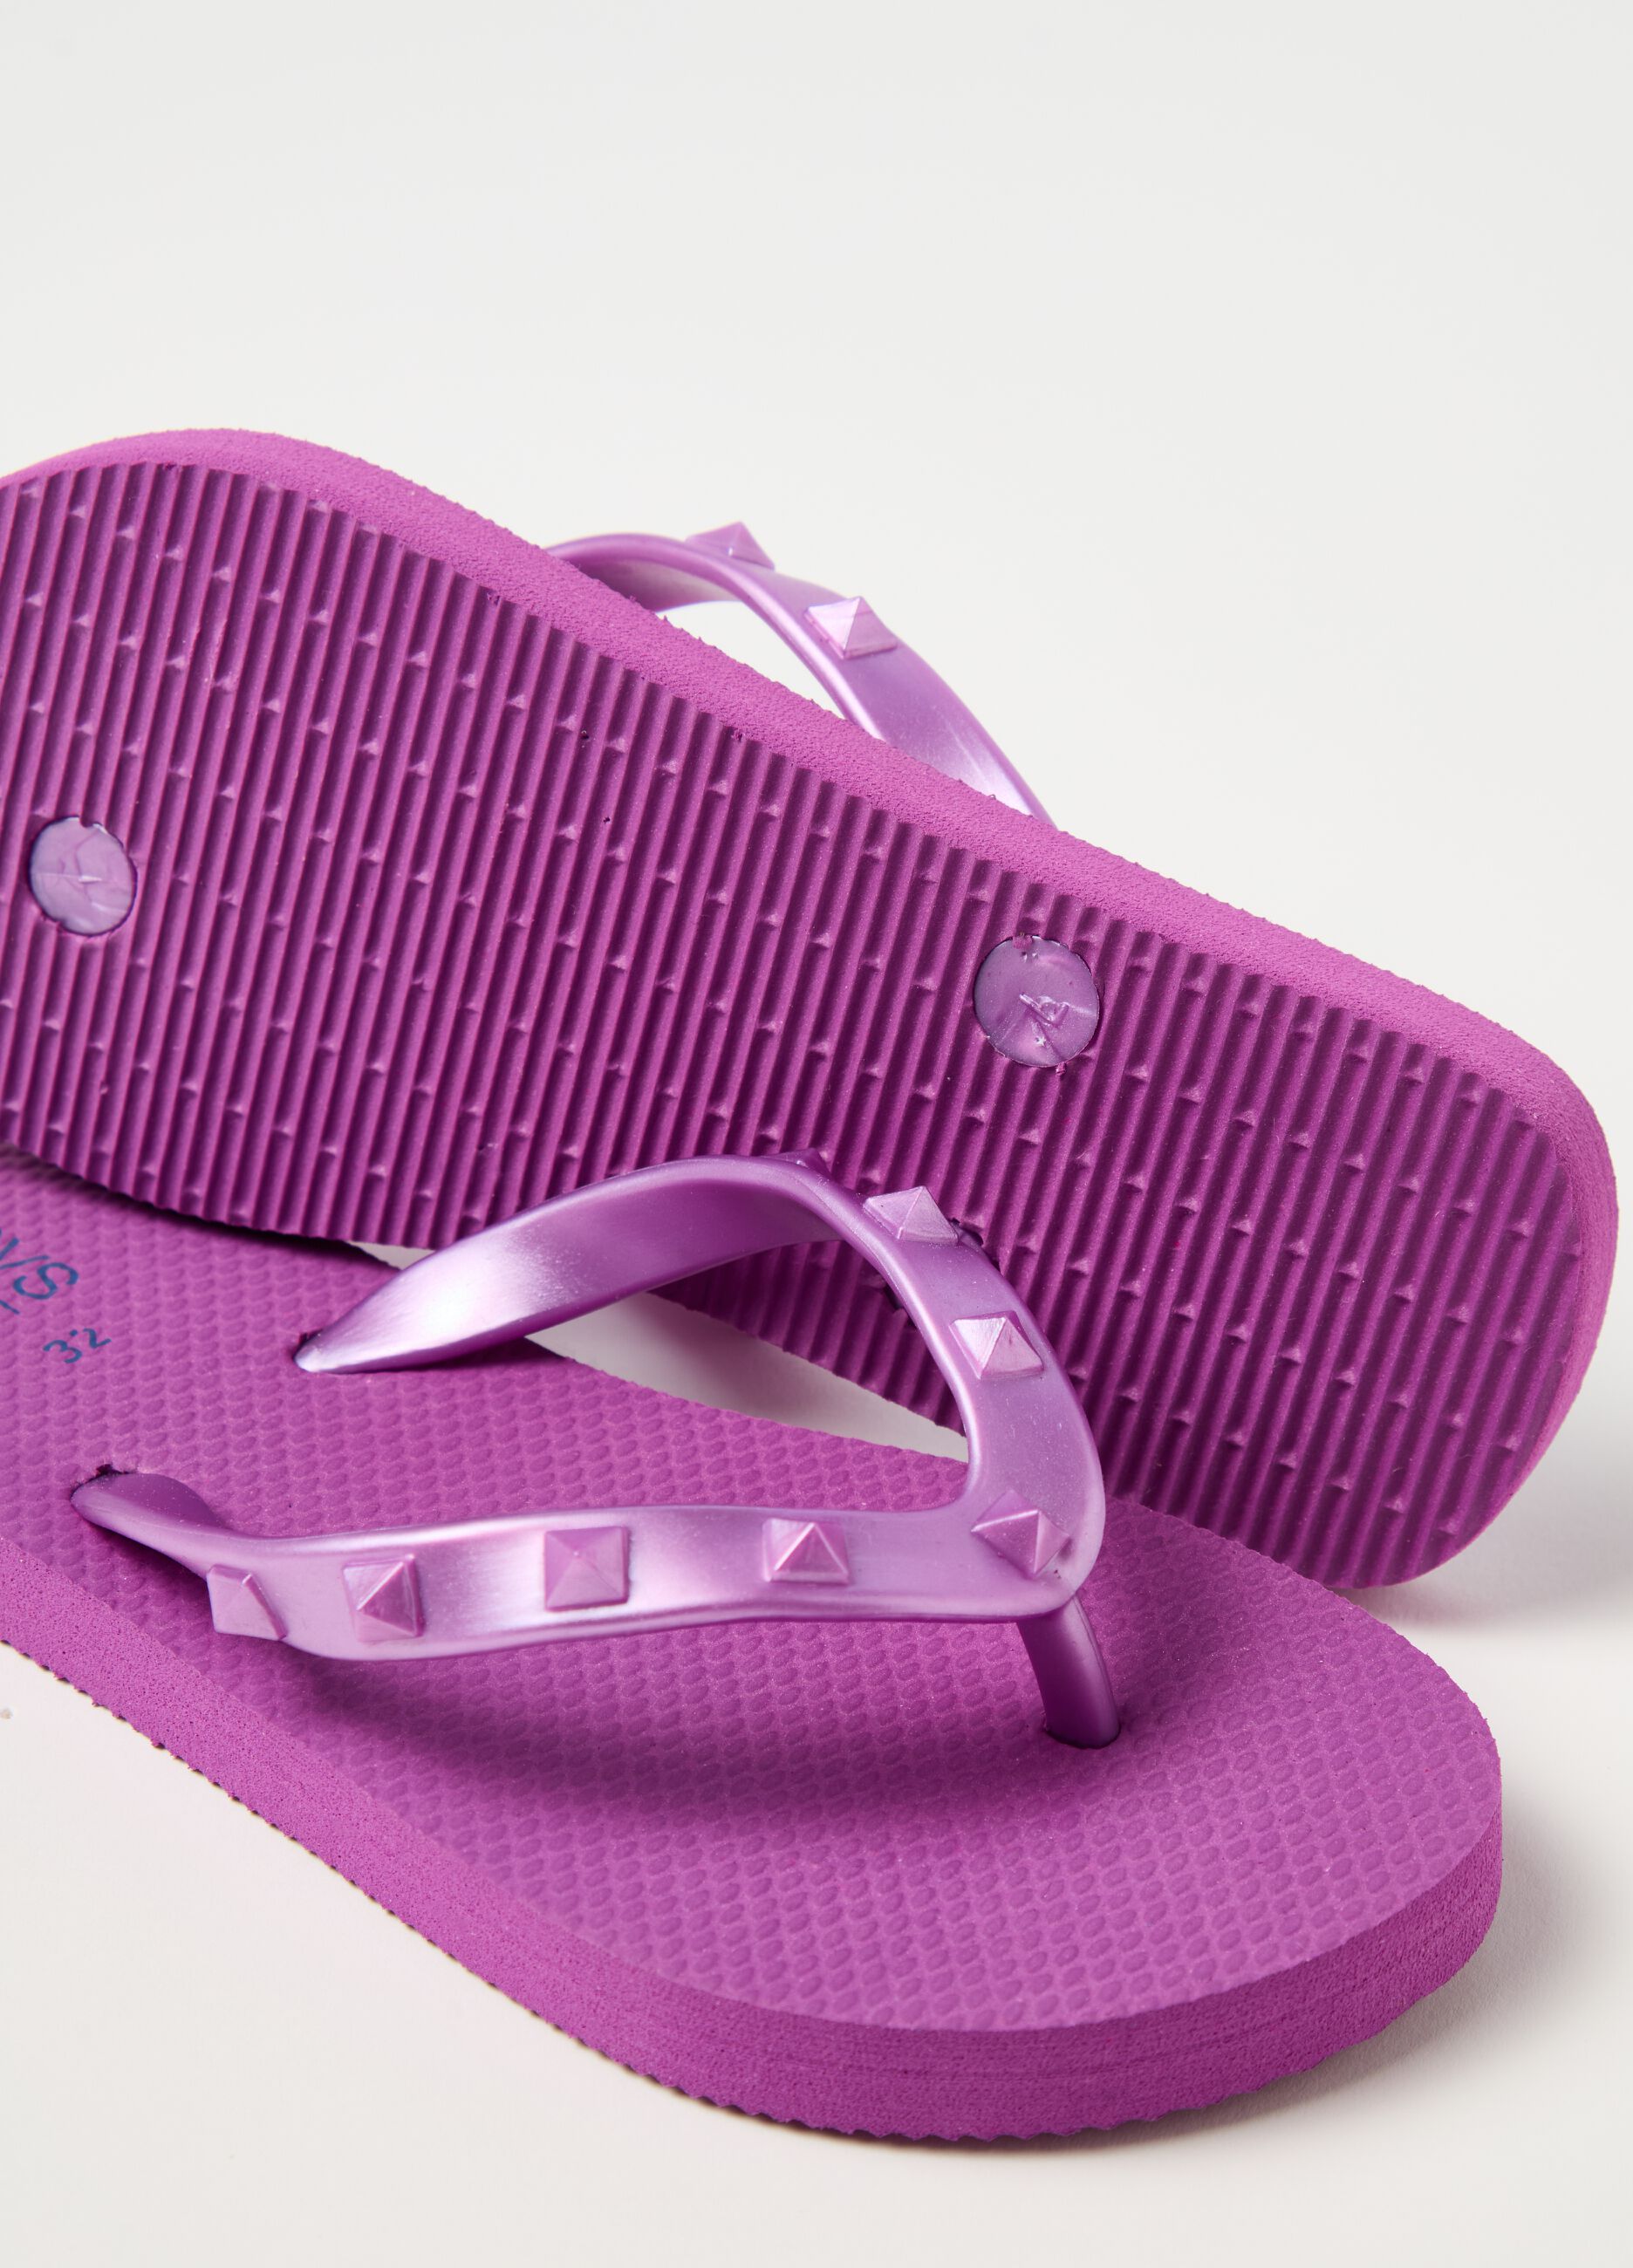 Thong sandals with studs